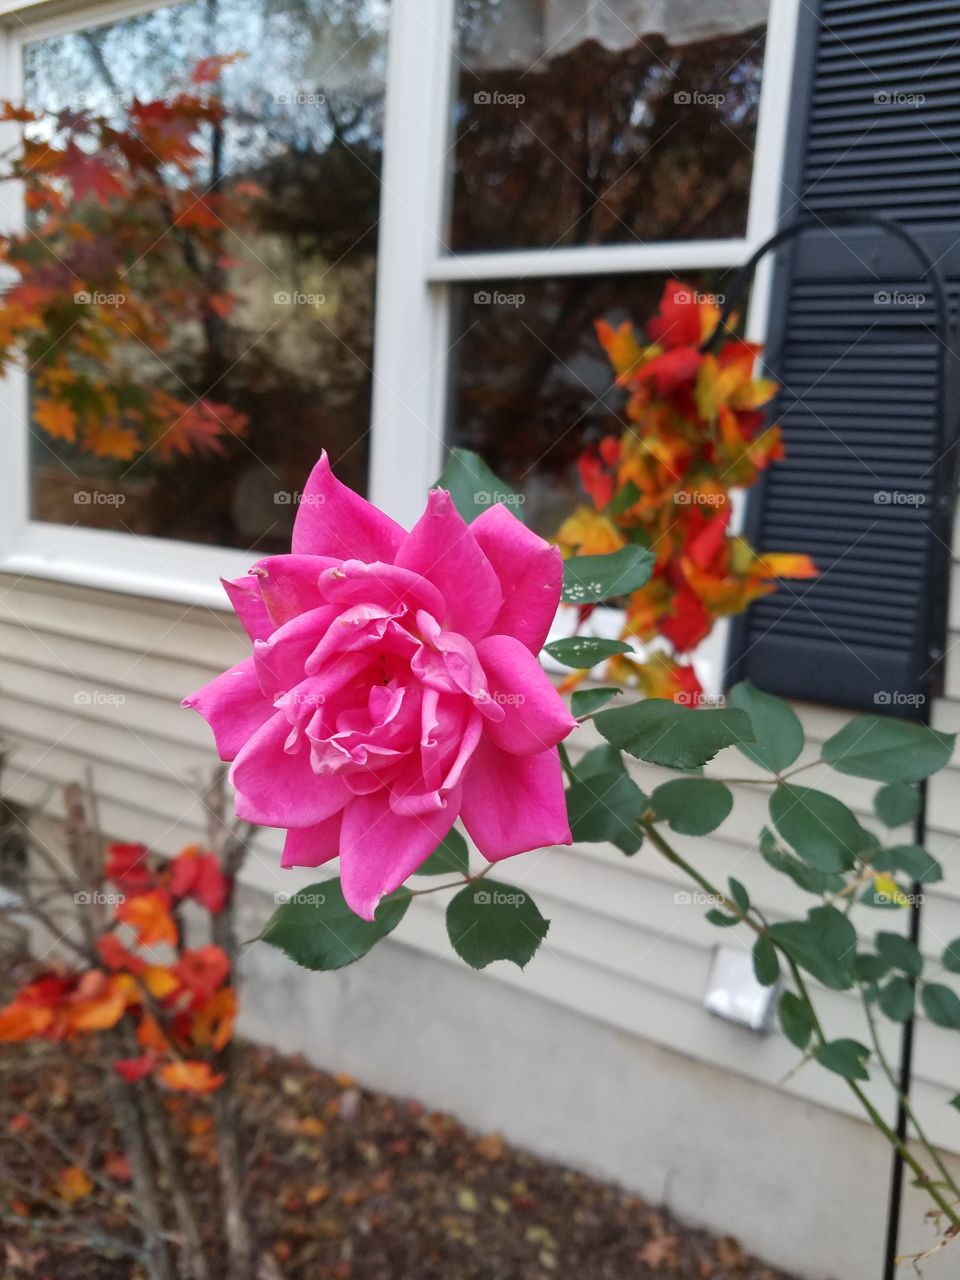 Single rose that bloomed in Autumn